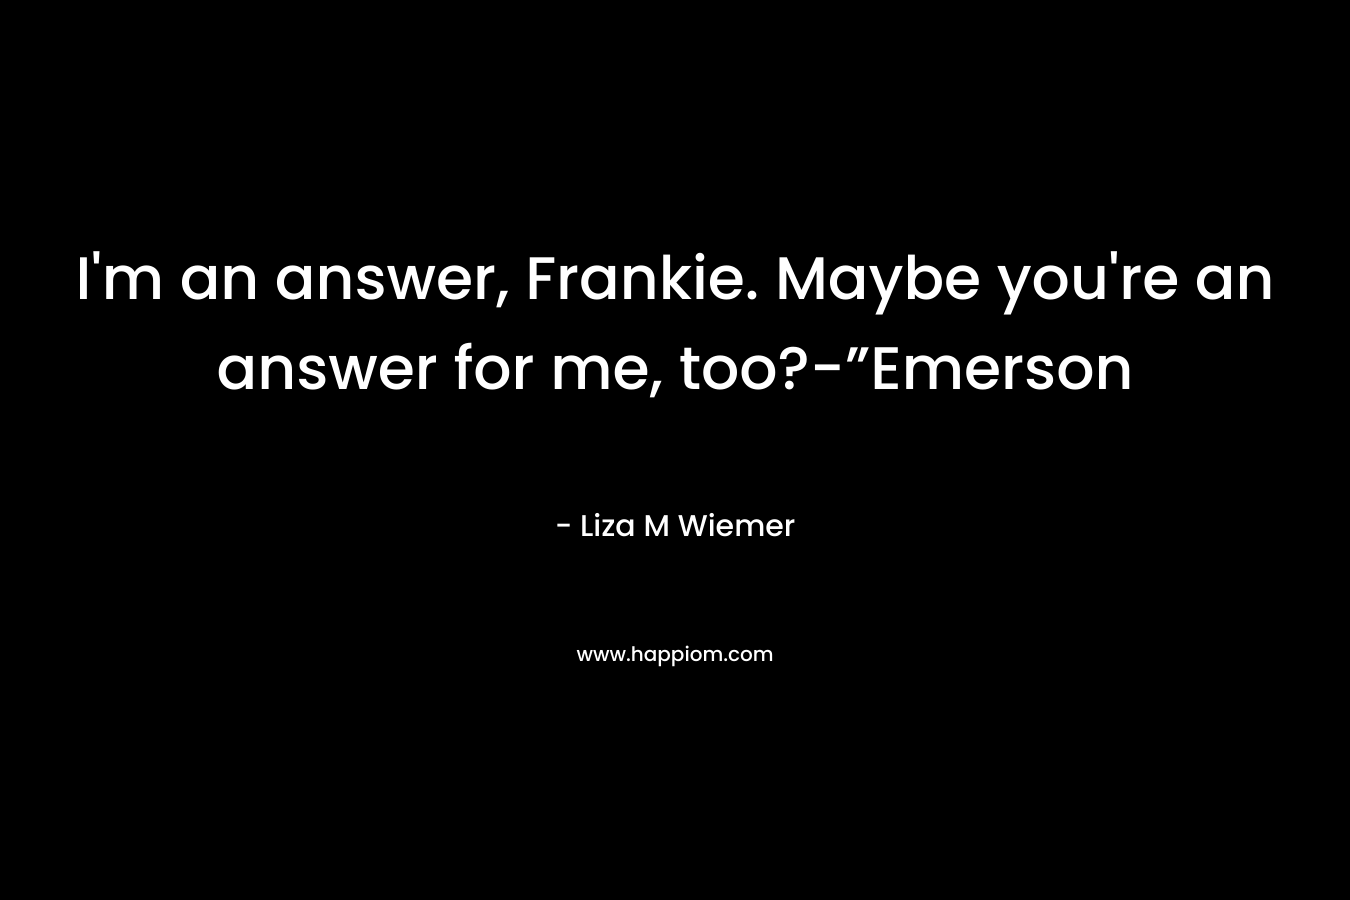 I'm an answer, Frankie. Maybe you're an answer for me, too?-”Emerson